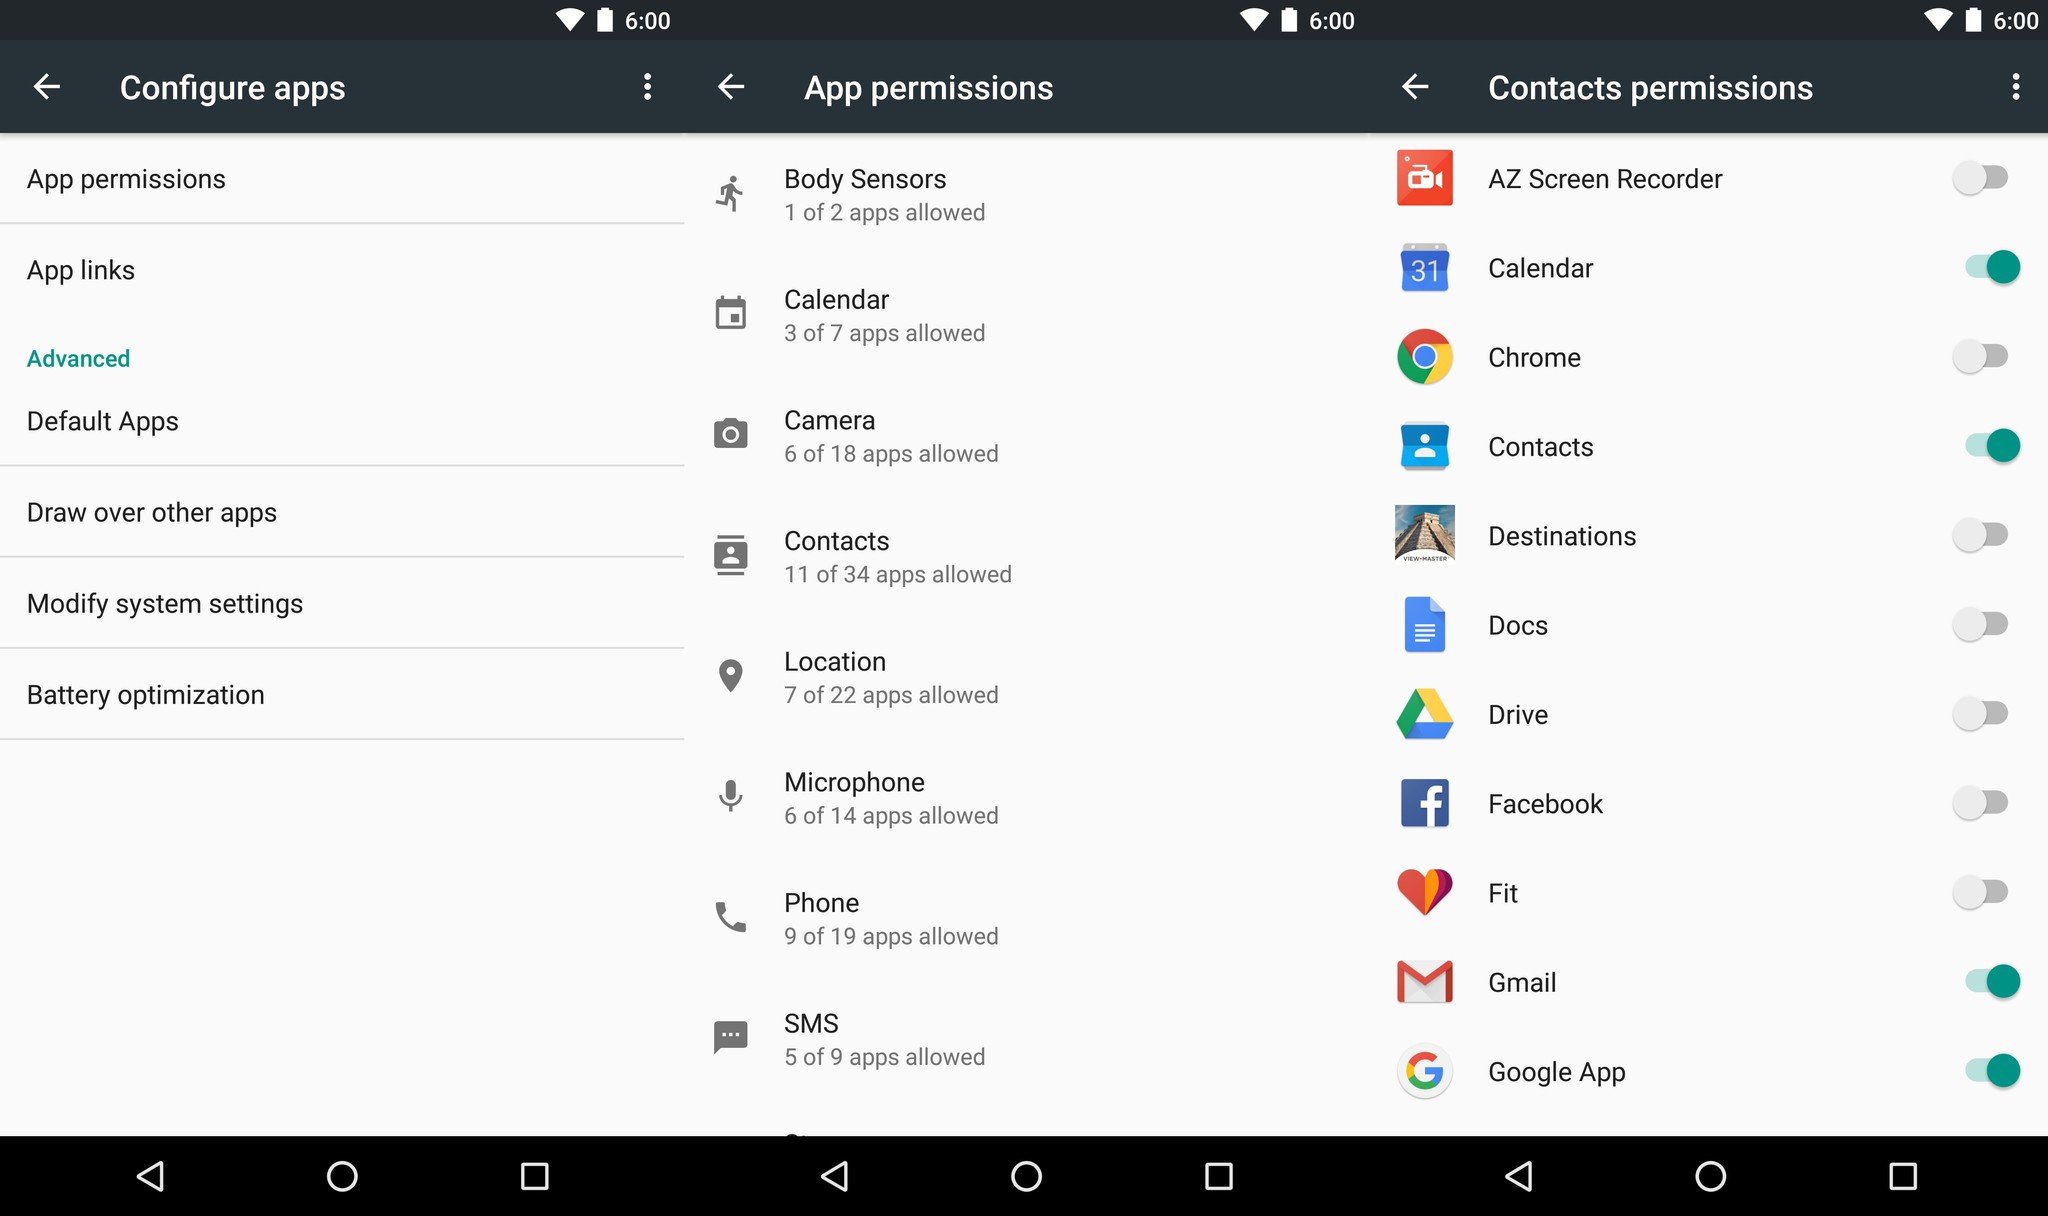 App permissions Android 6.0